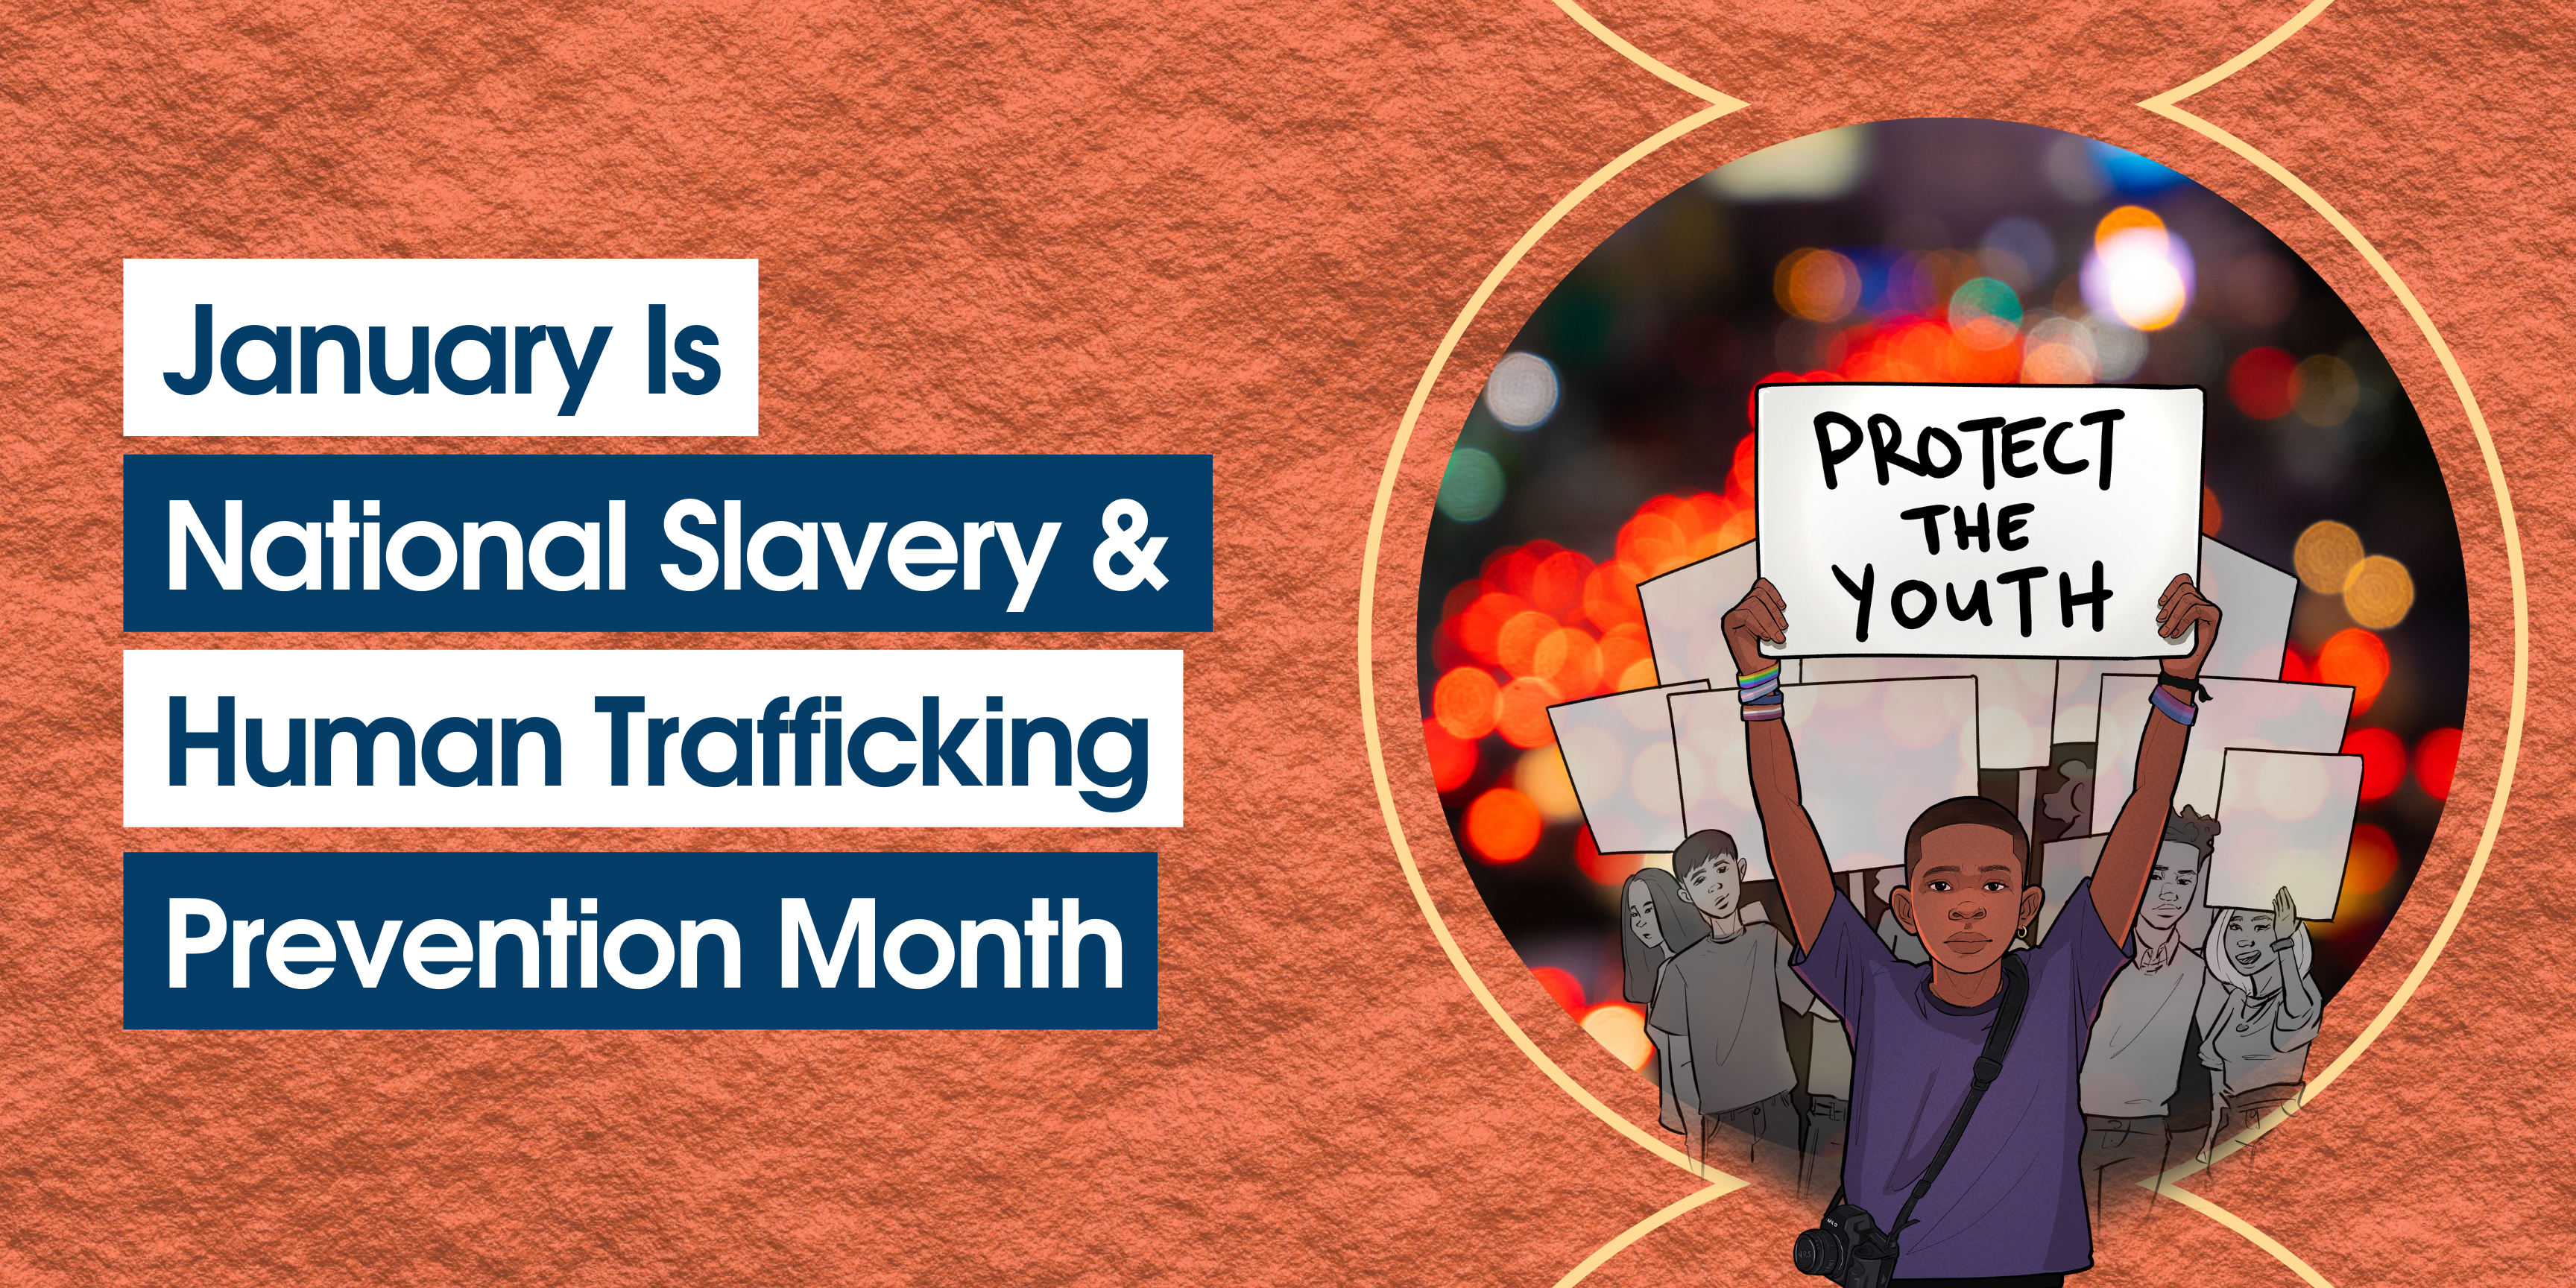 JANUARY IS HUMAN TRAFFICKING PREVENTION MONTH